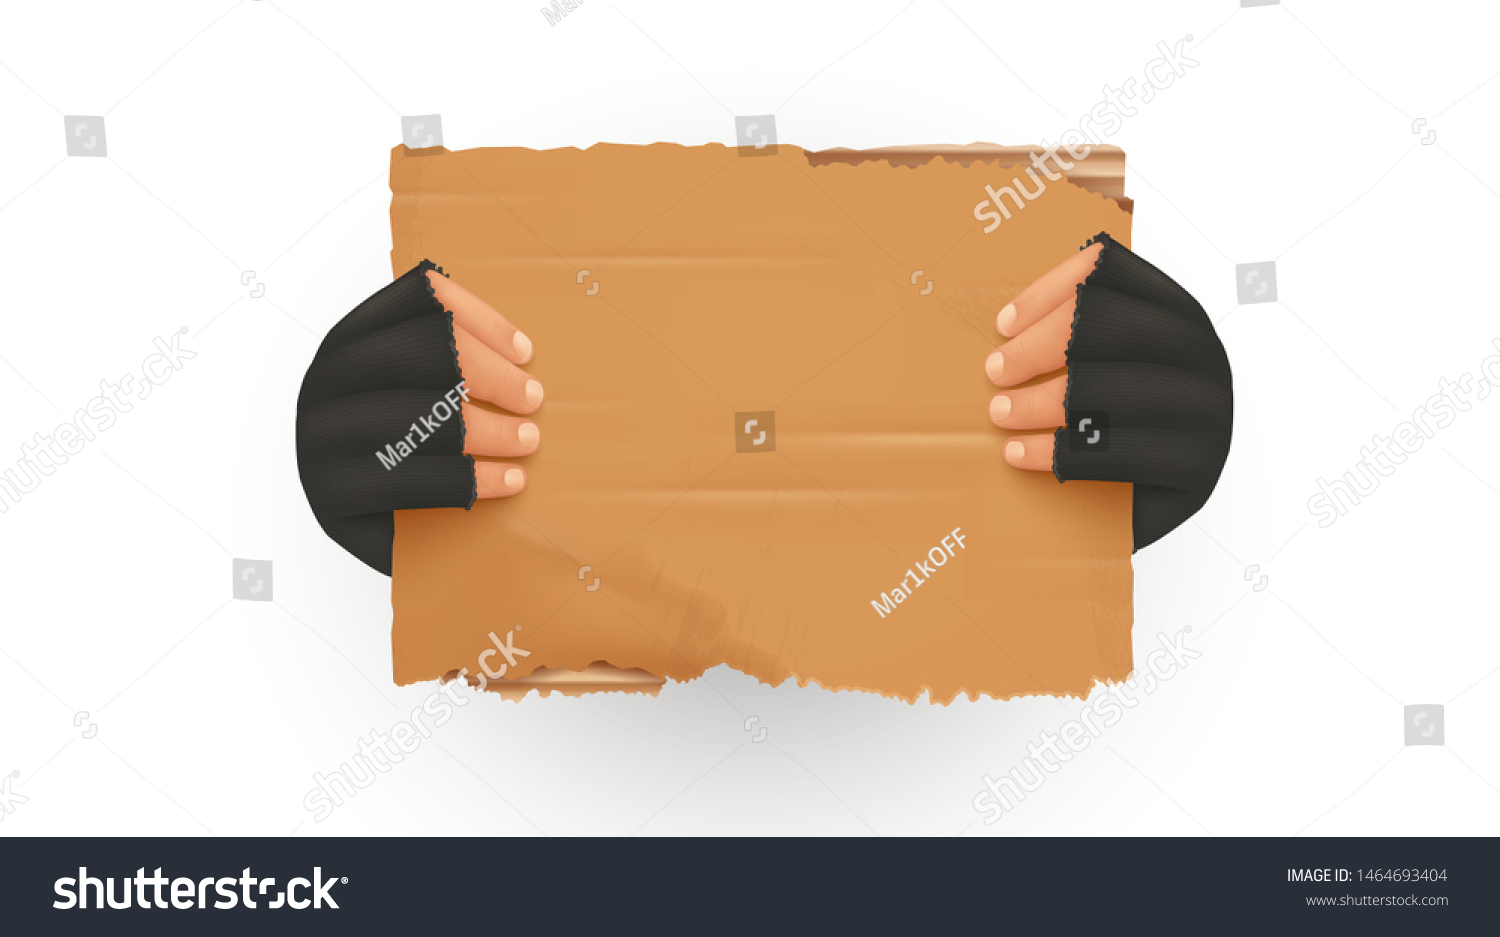 Homeless. Man holding up blank cardboard sign. Homeless holding a cardboard. Isolated vector illustration #1464693404